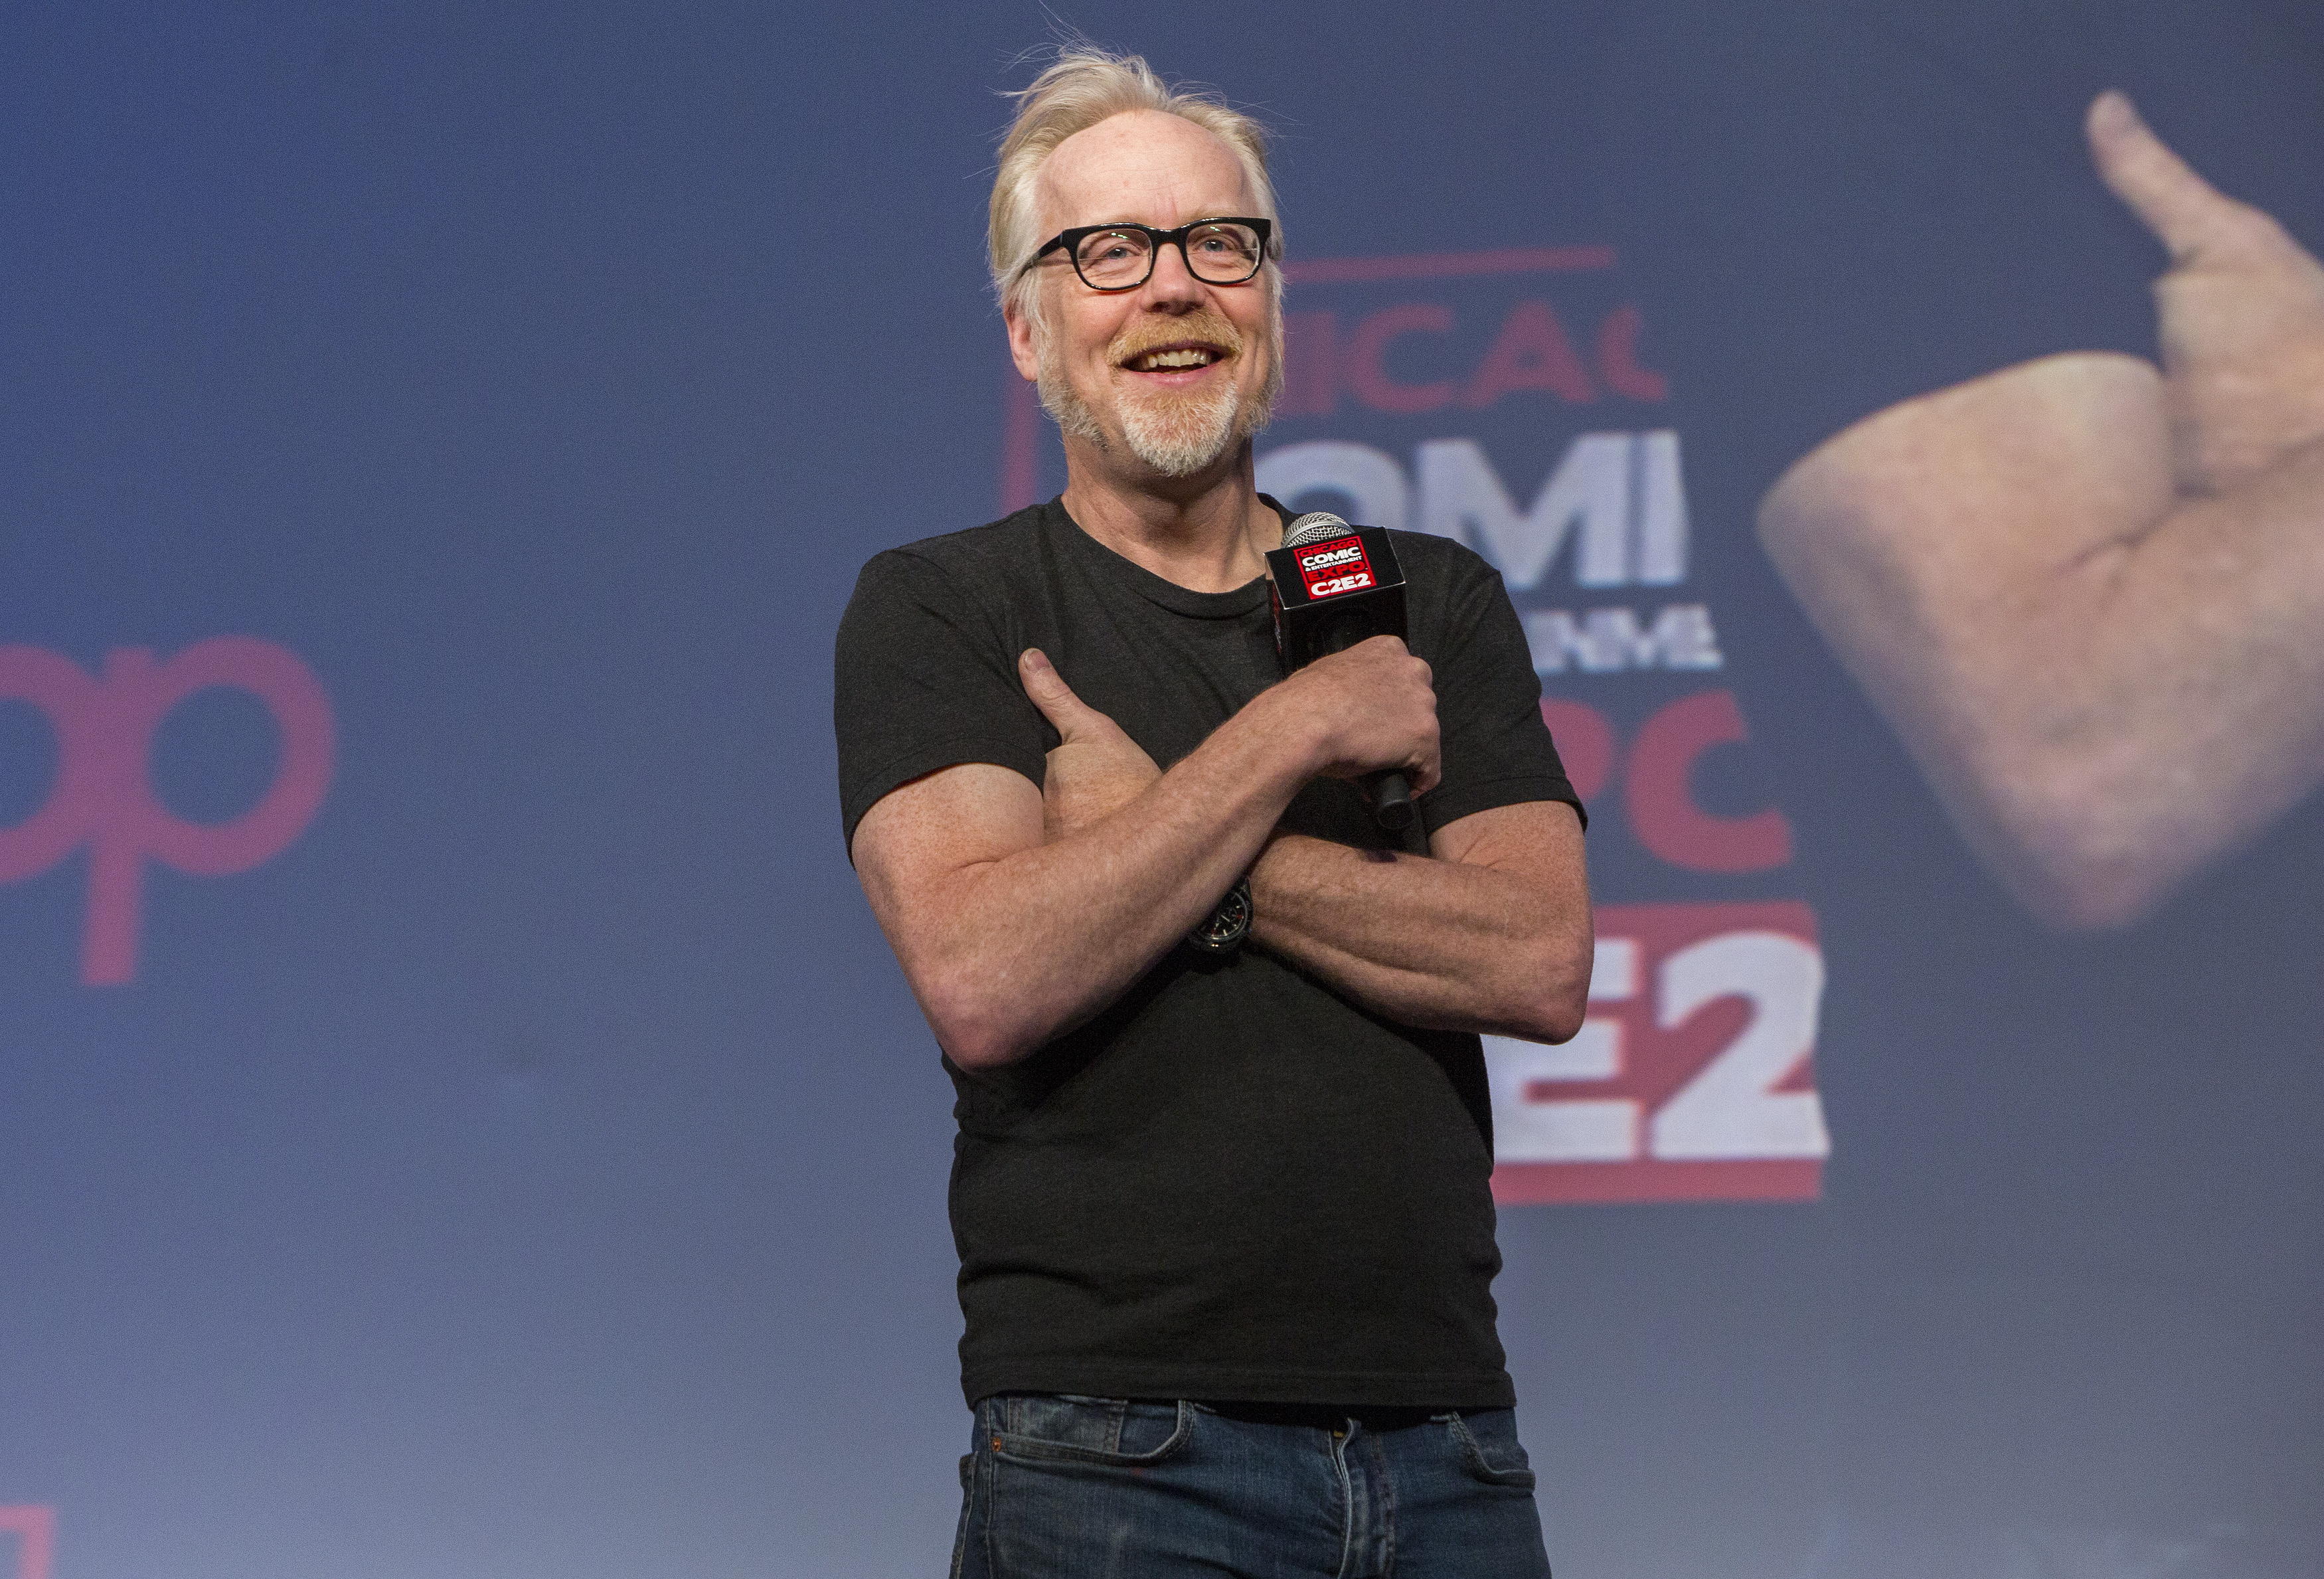 Adam Savage of "MythBusters" and "Unchained Reaction" speaks during 2020 C2E2 on February 29, 2020, in Chicago, Illinois. | Source: Getty Images